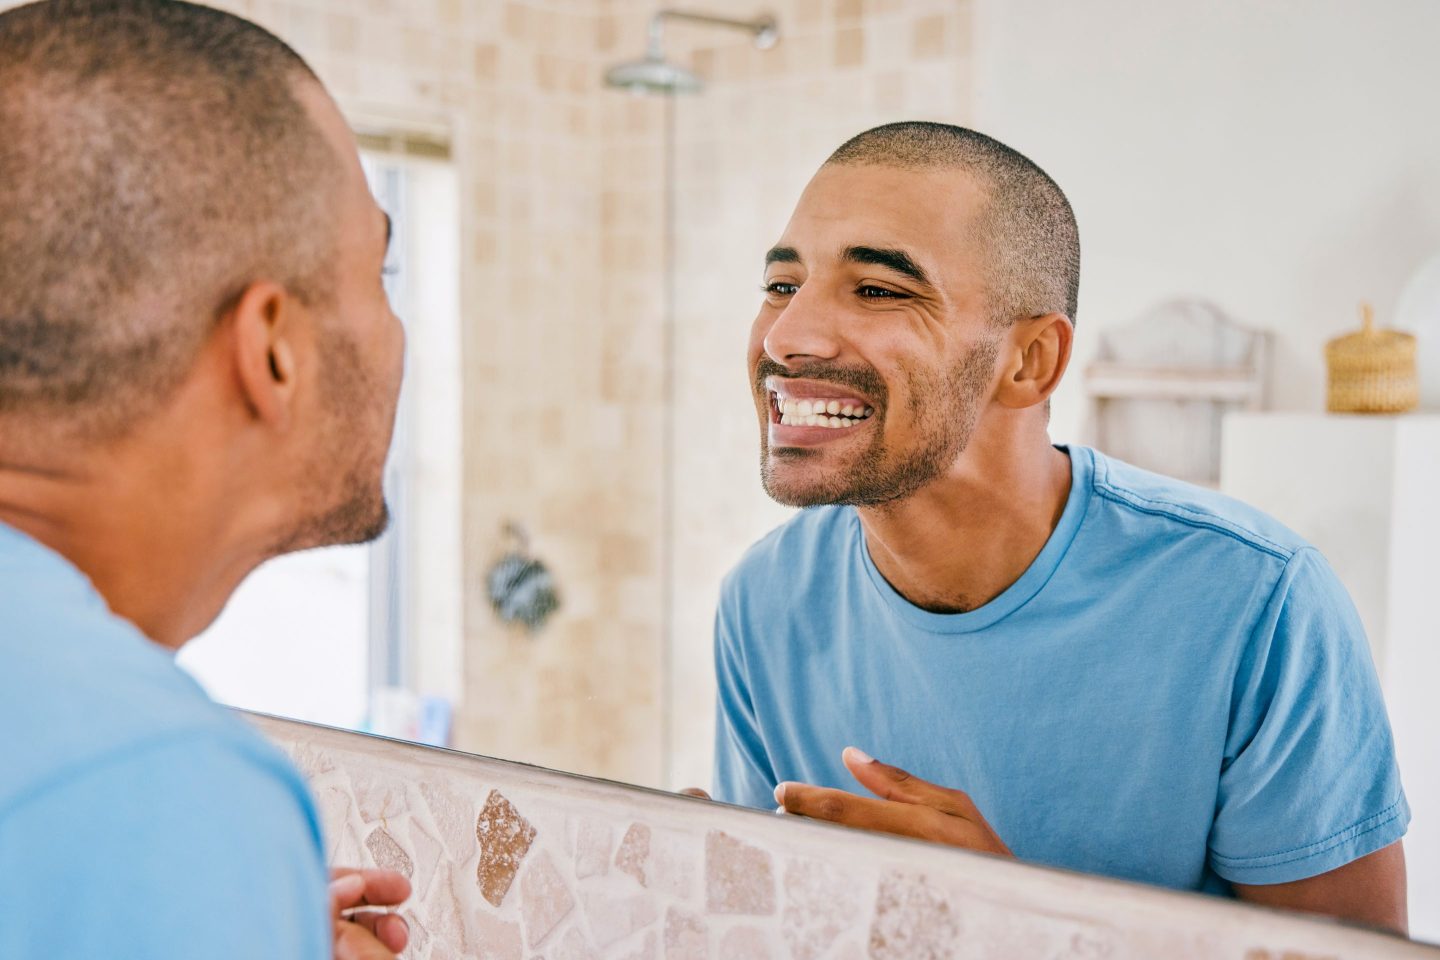 Shot of a young man admiring his freshly brushed teeth in the bathroom mirror at home.